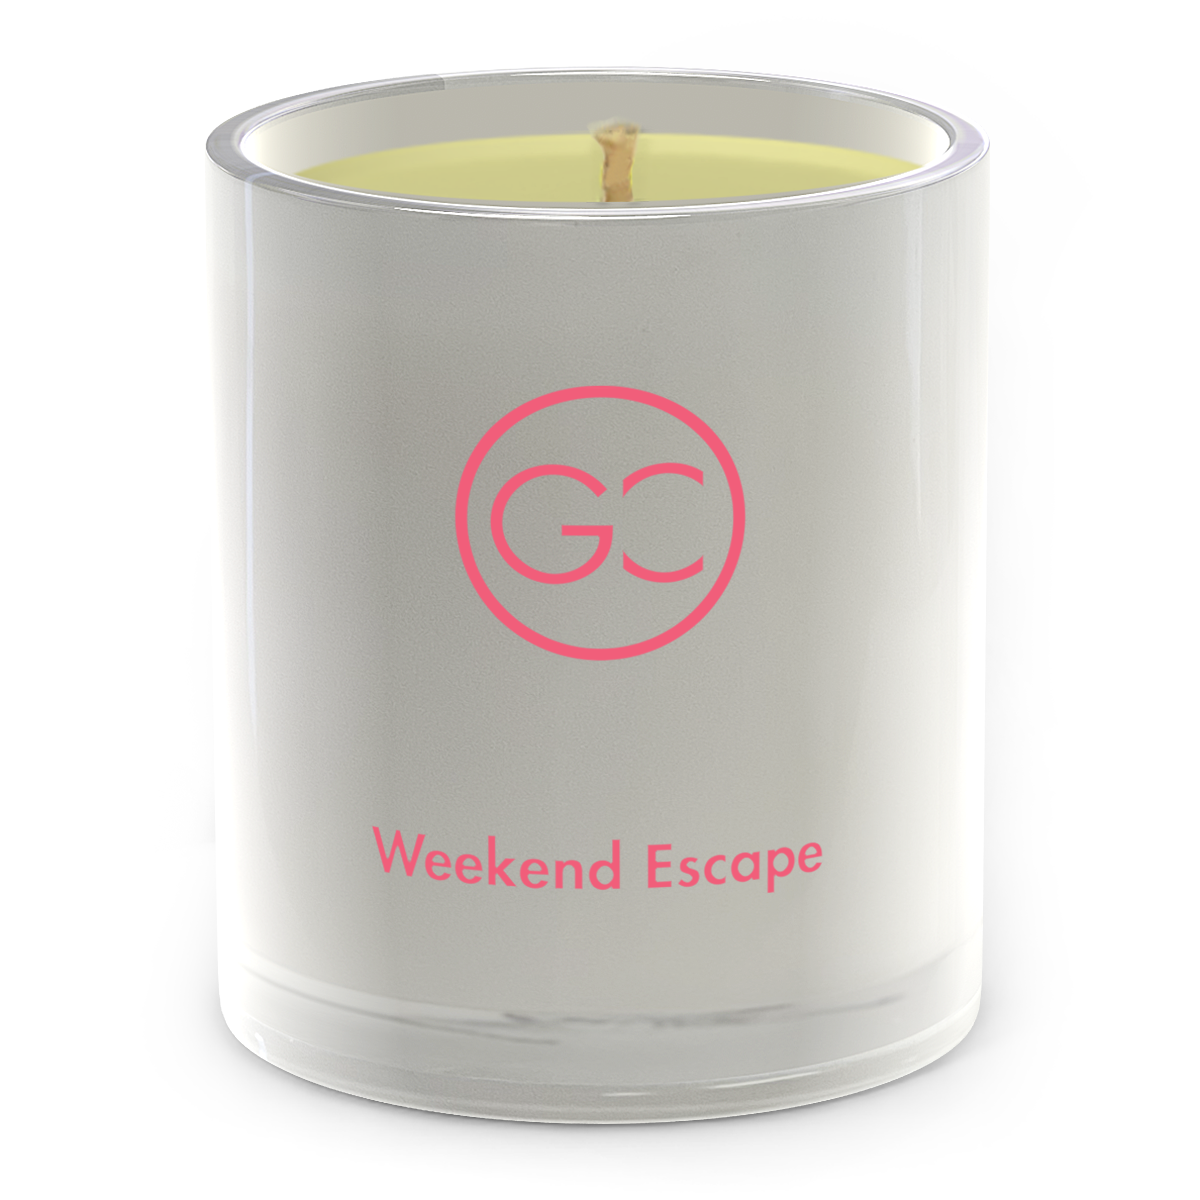 Weekend Escape - Amber Scented Soy Candle 55hr Burn